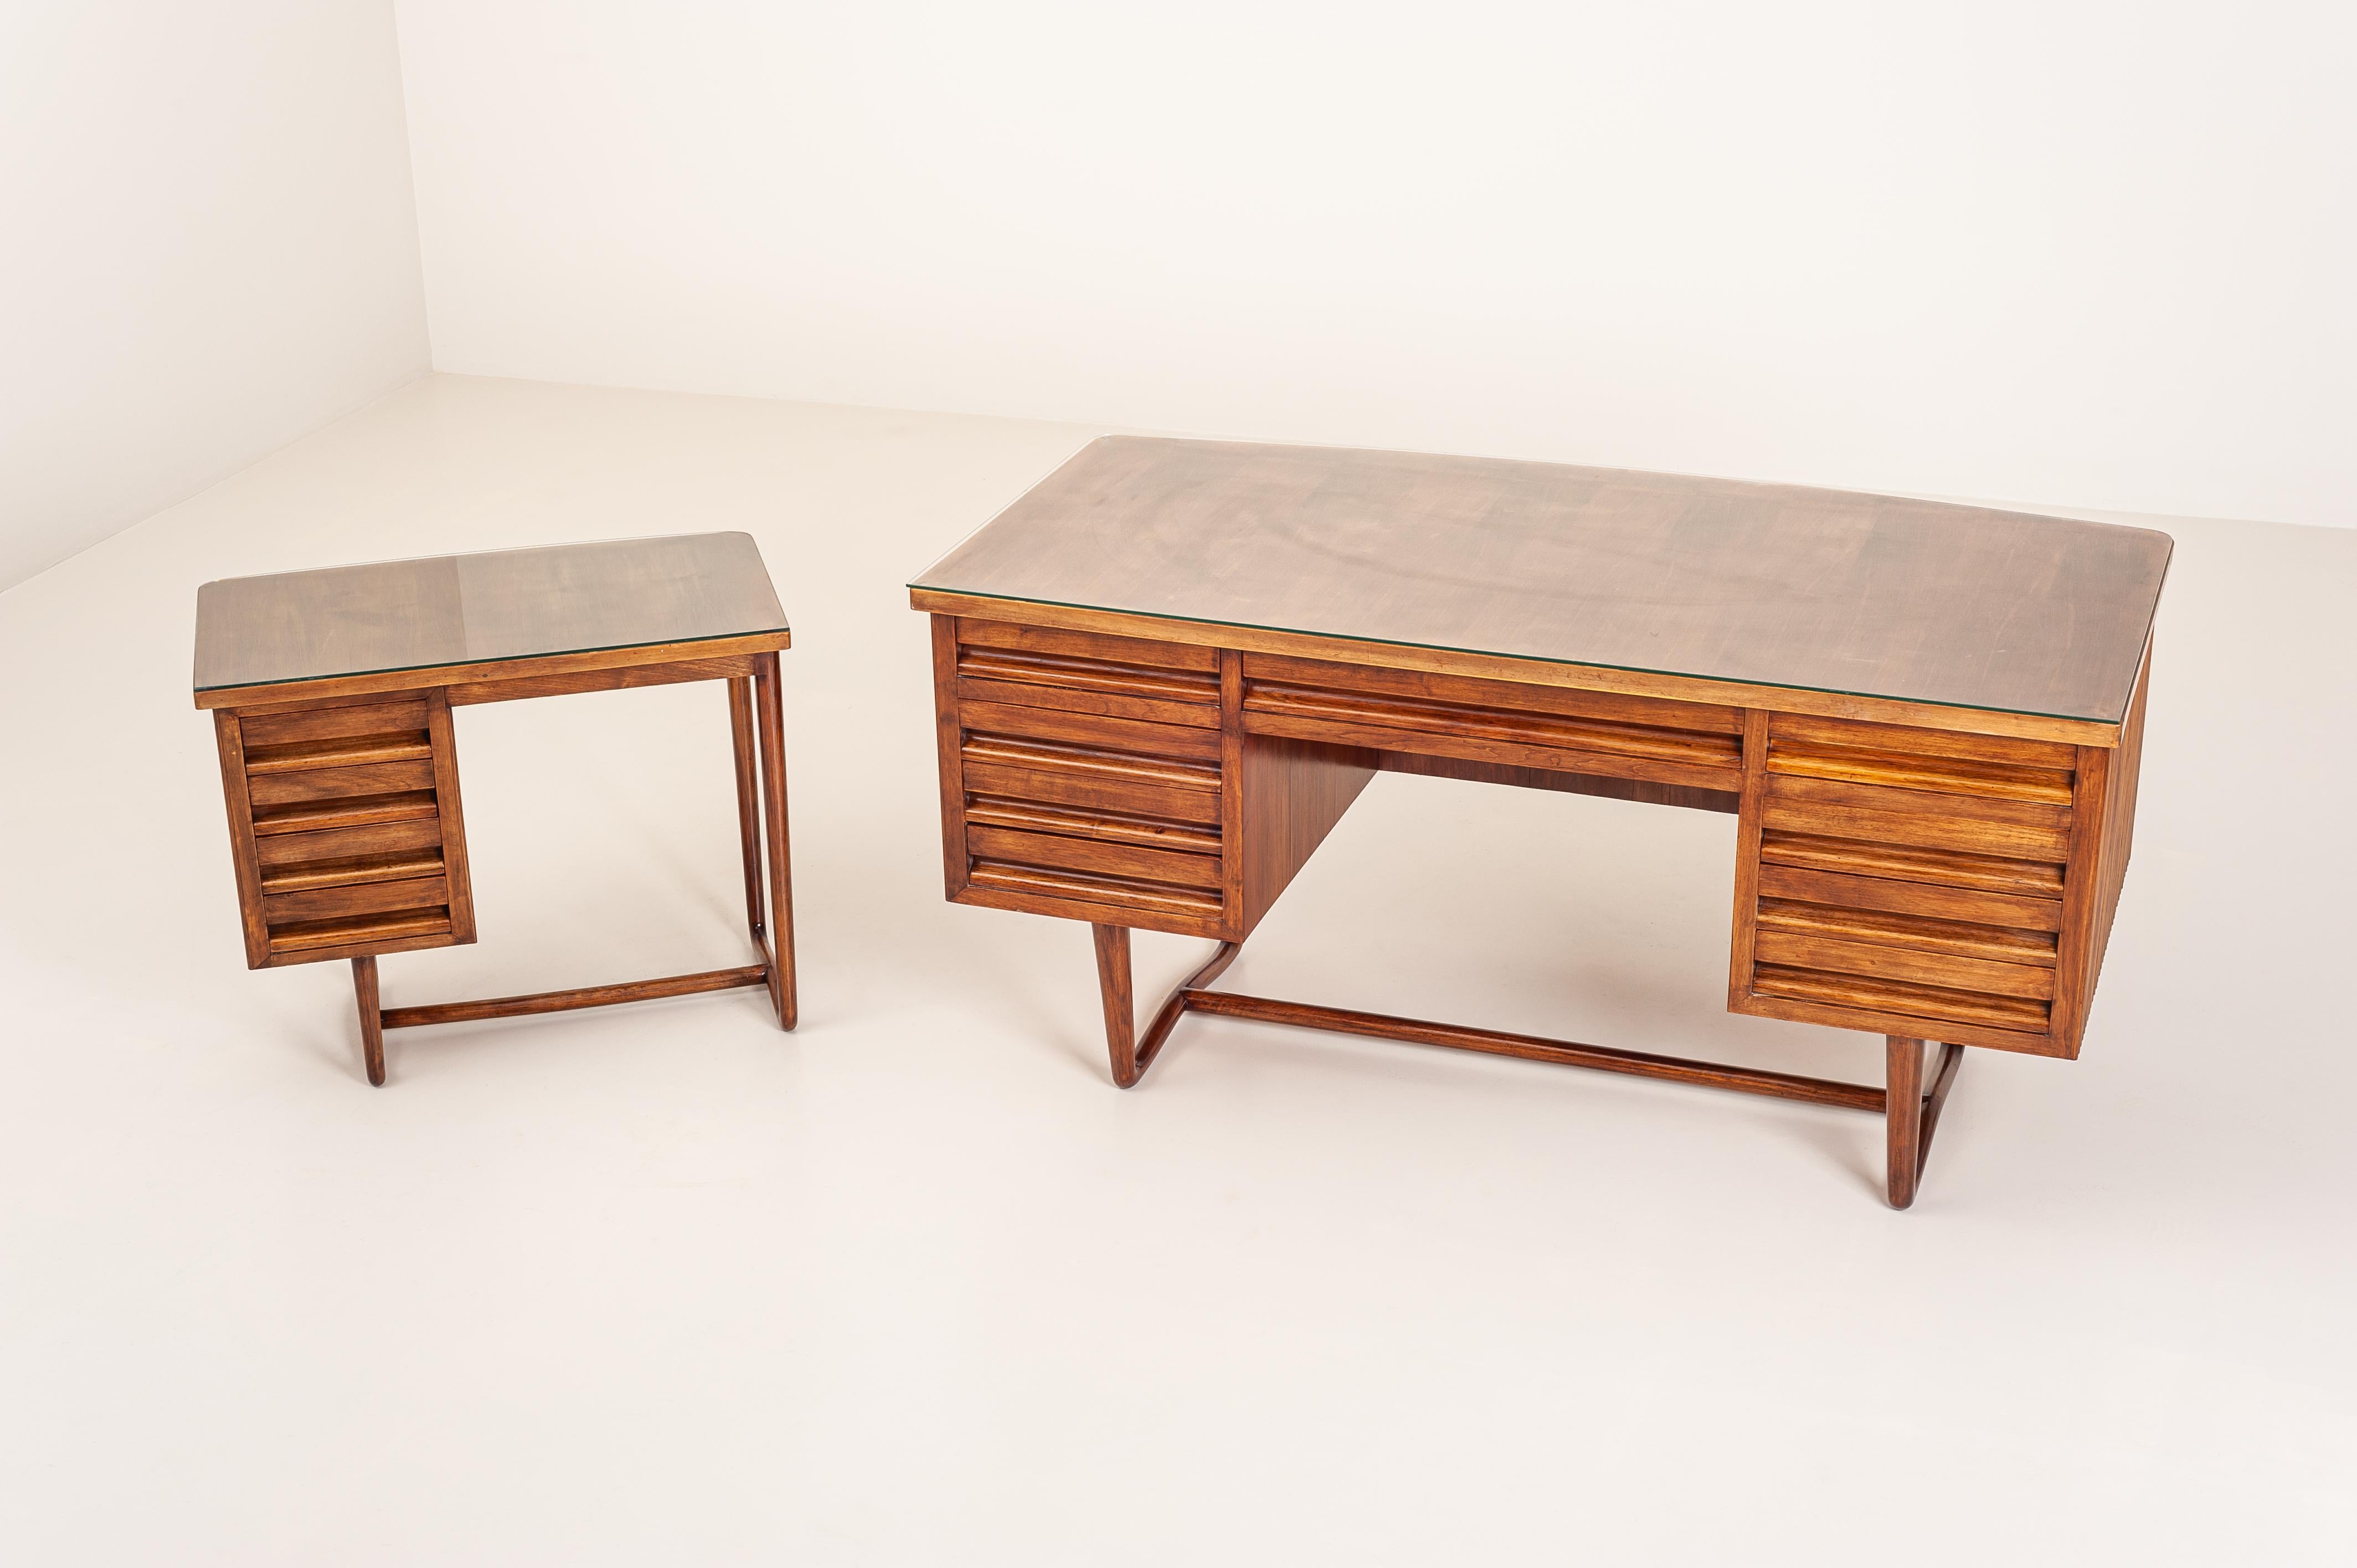 Italian Executive Grissinato Desk Made in Walnut with Carved Legs and Glass Top 12